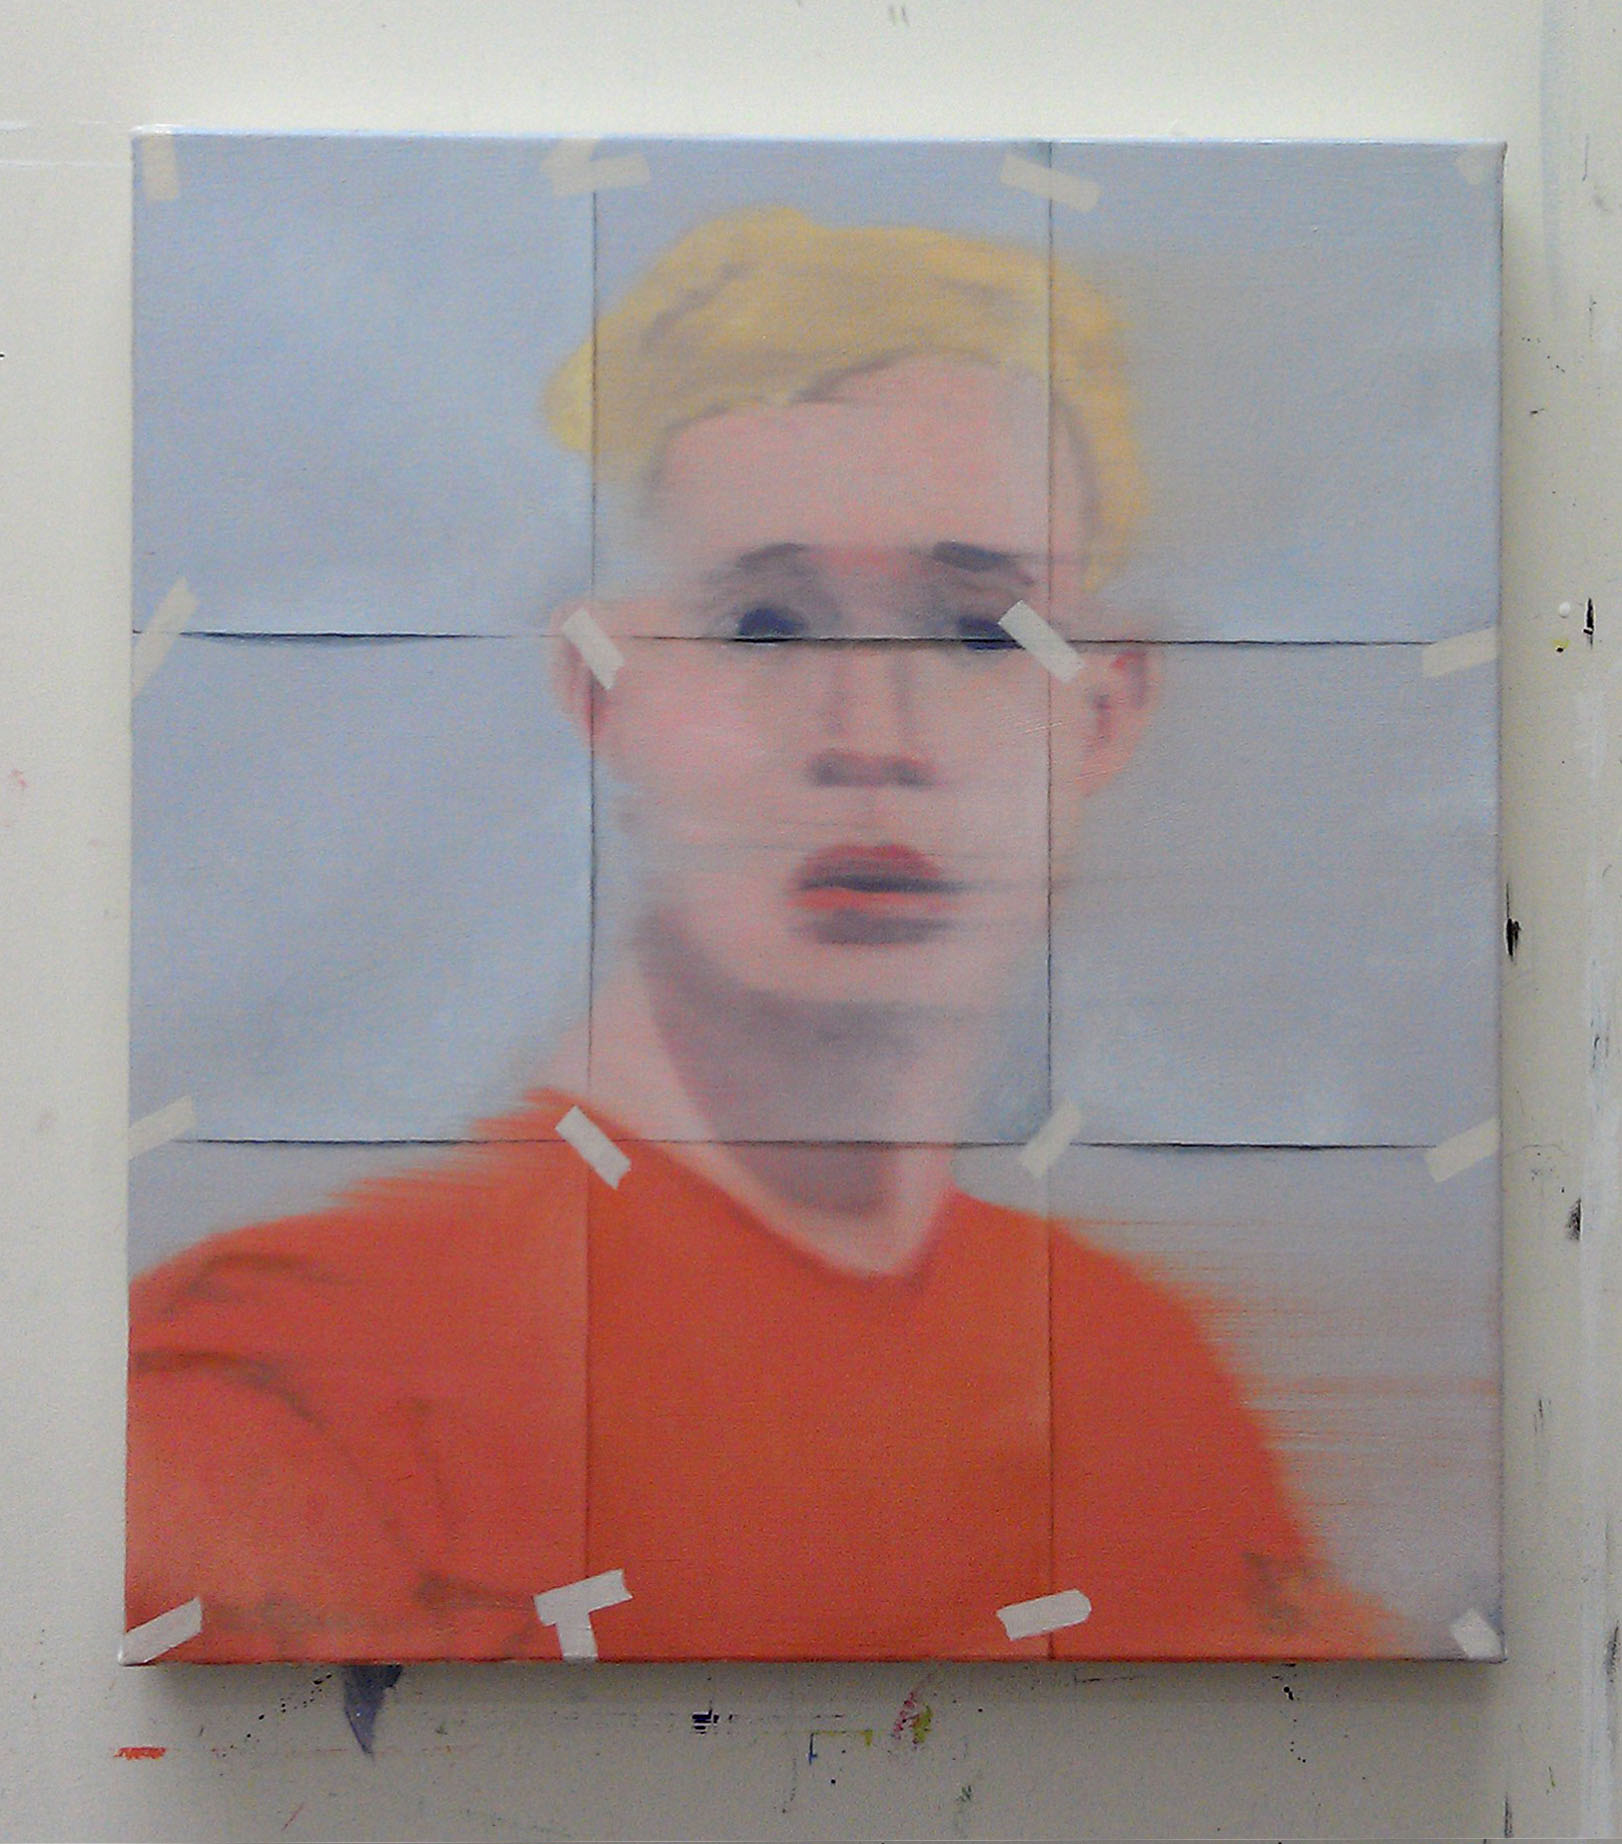 blurry oil painting portrait of a young man with blond hair, red tee shirt and with a worried expression 